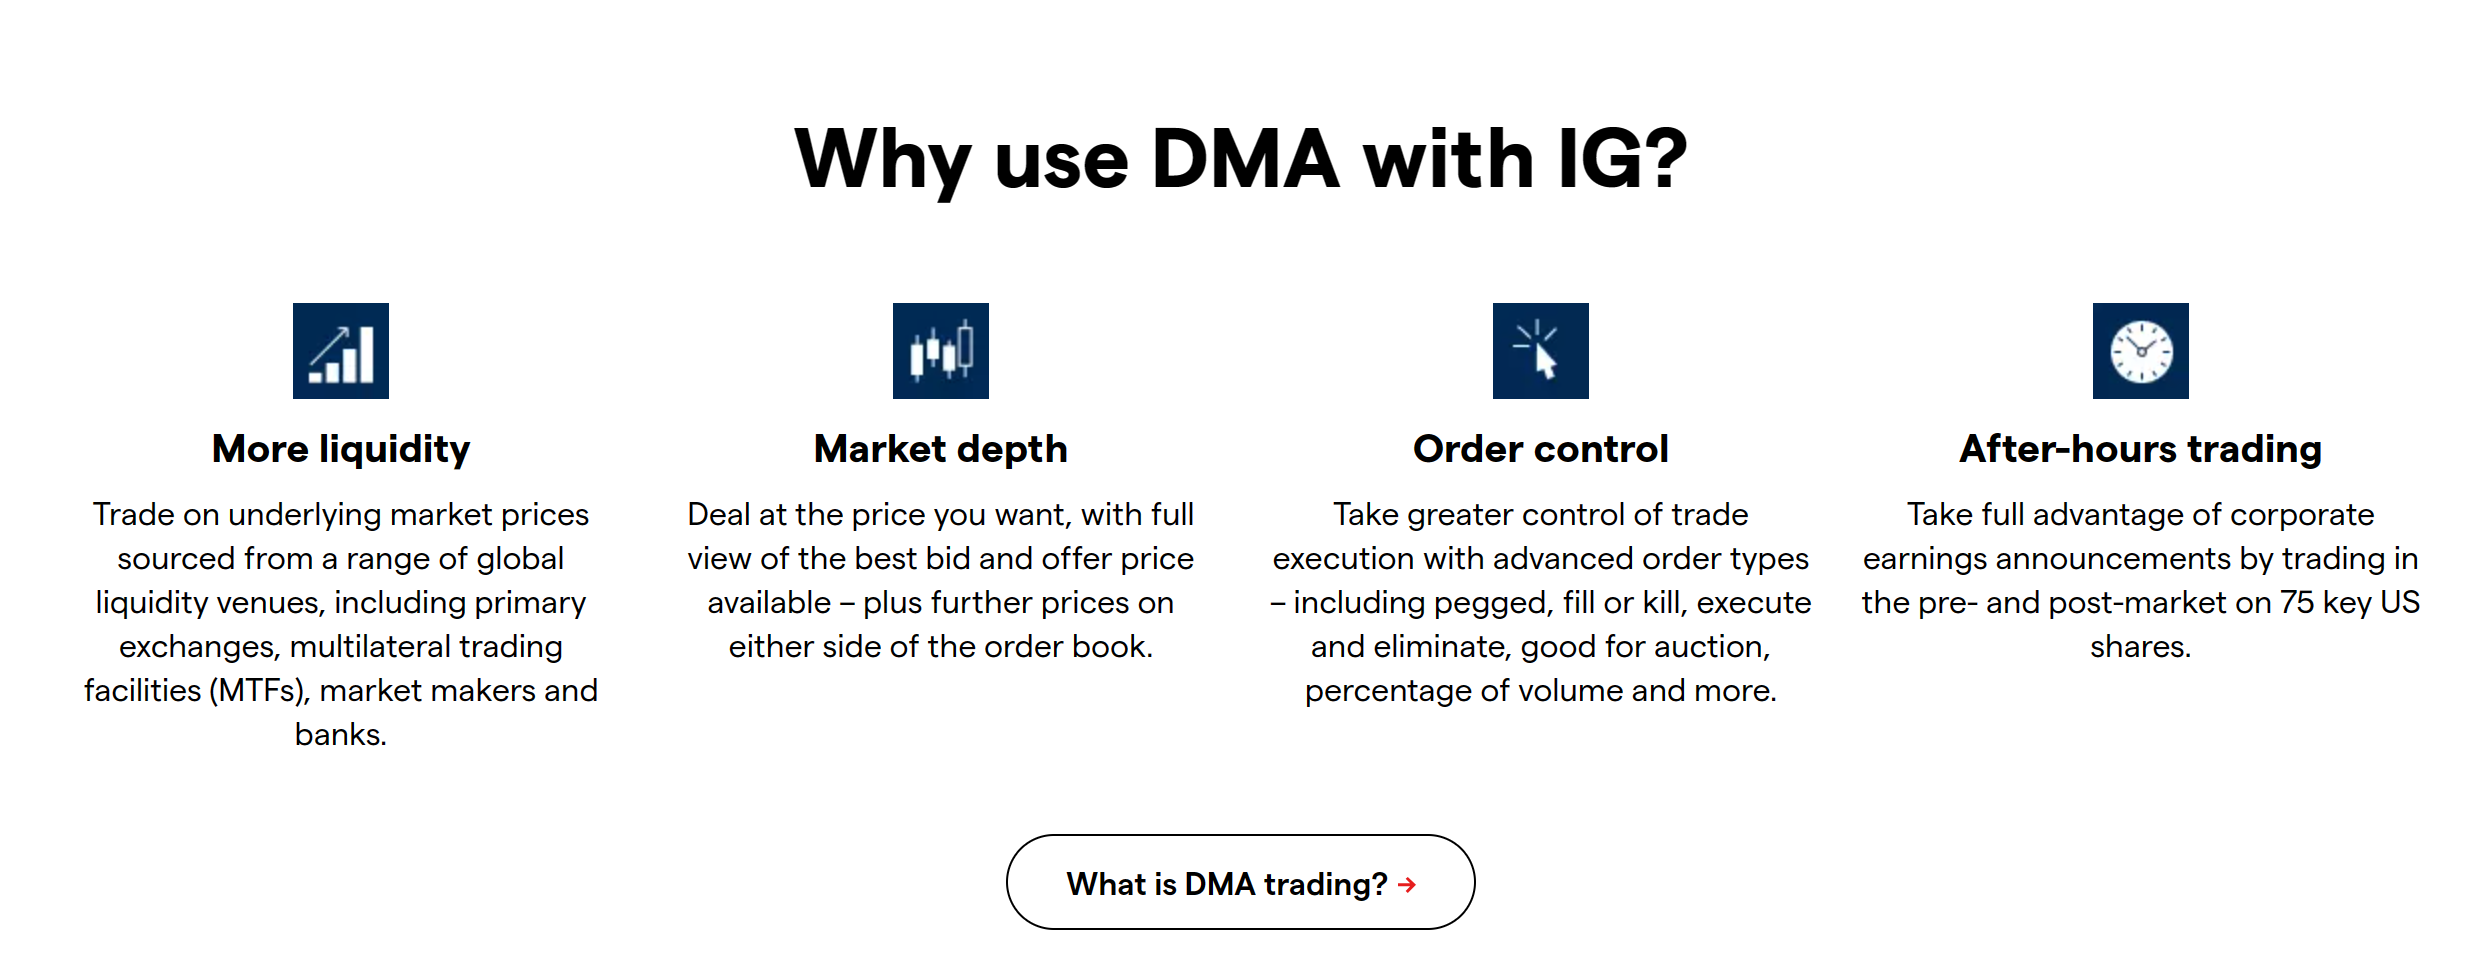 Why use DMA with IG?